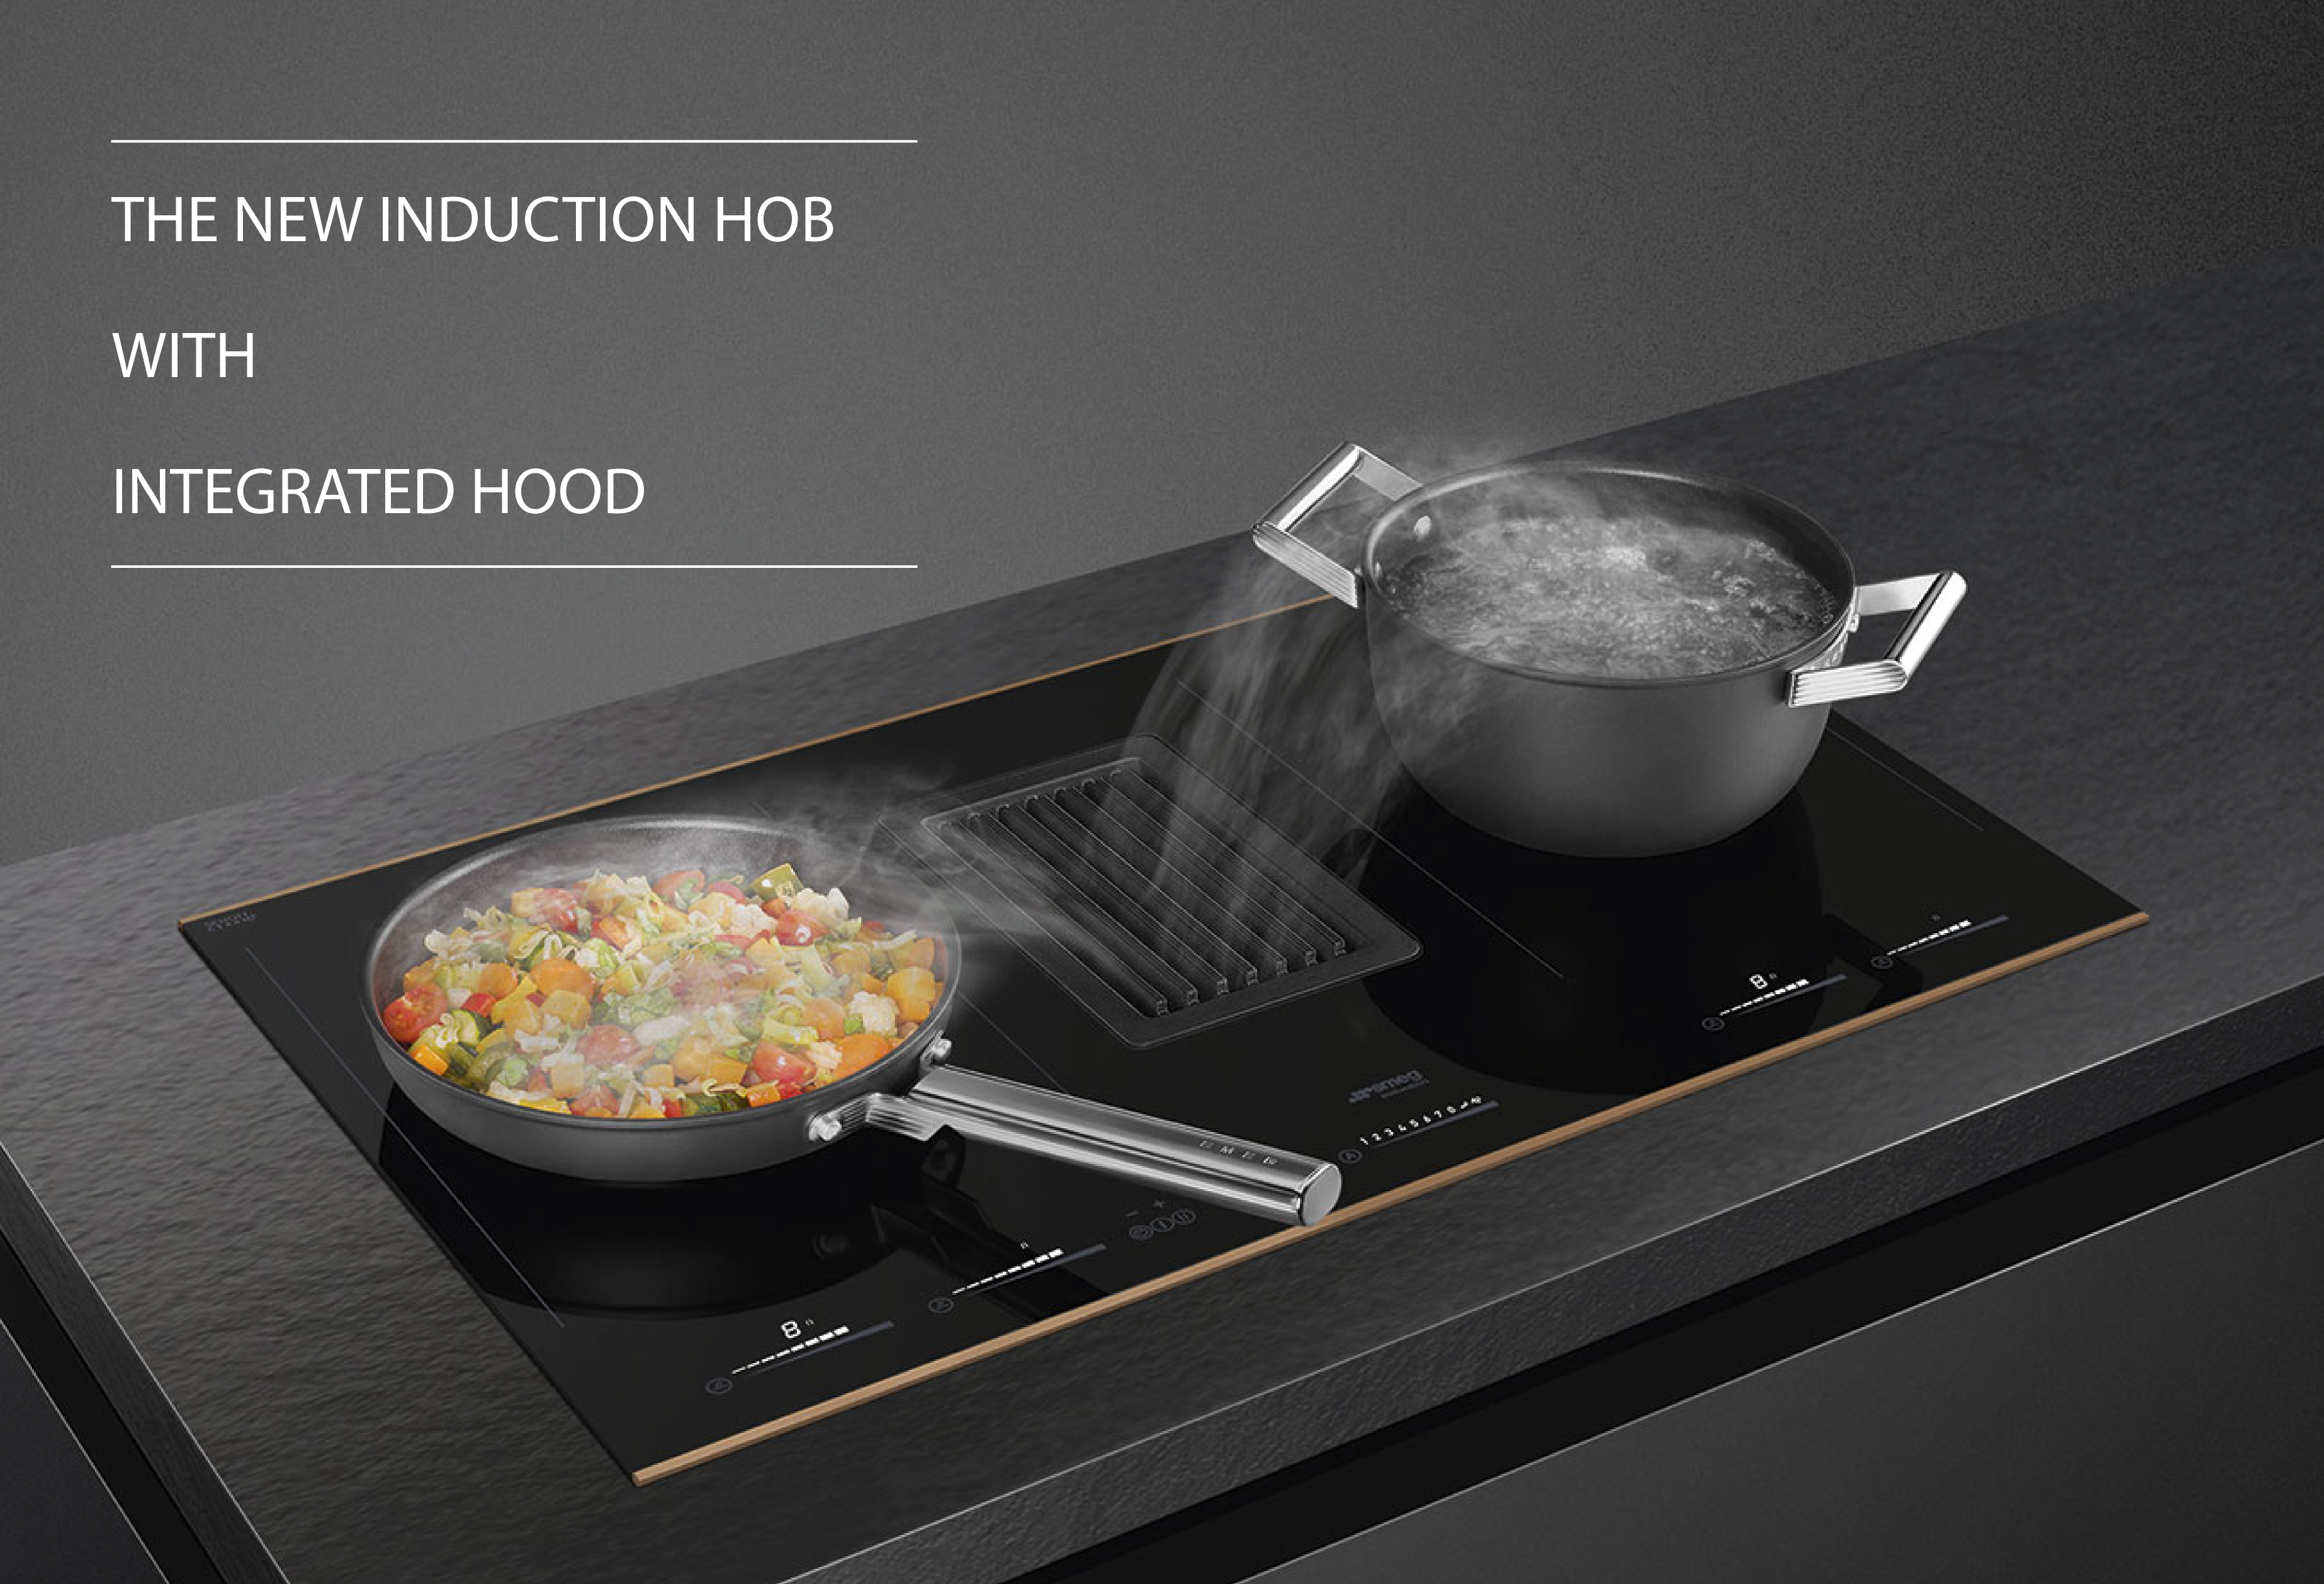 The New Induction Hob with Integrated Hood